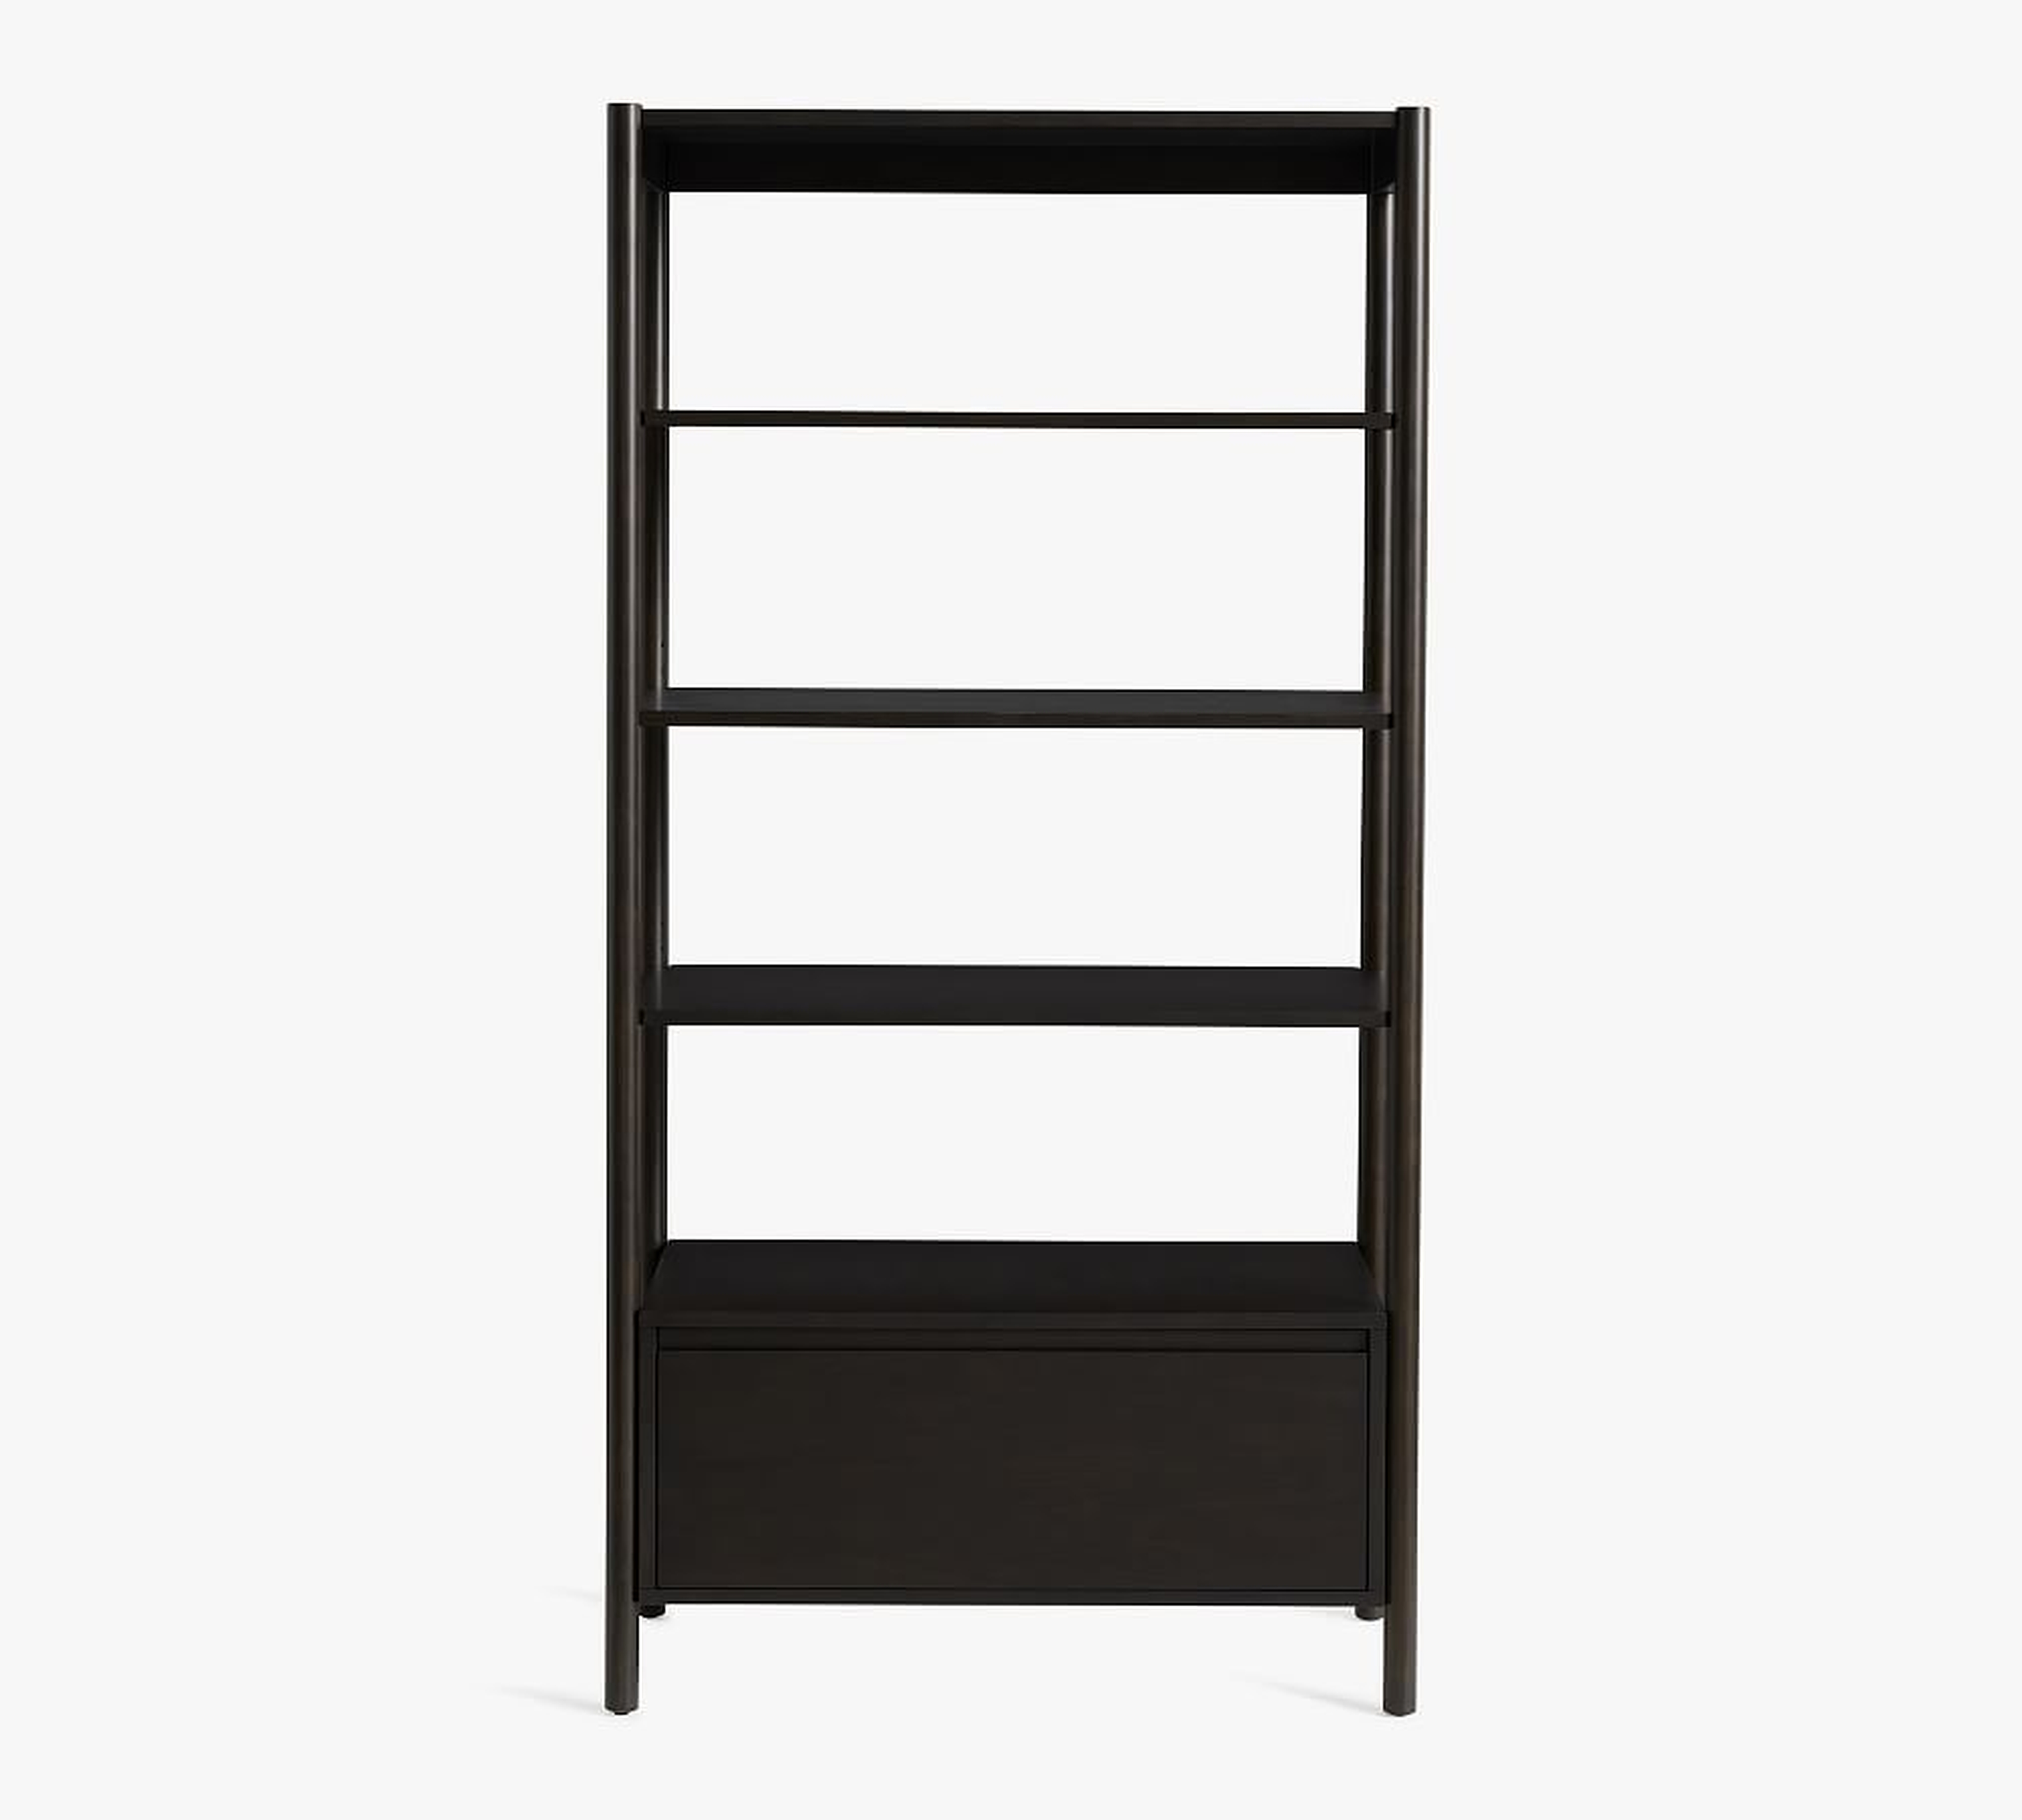 Bloomquist 37" x 73" Bookcase with Drawer, Warm Black - Pottery Barn